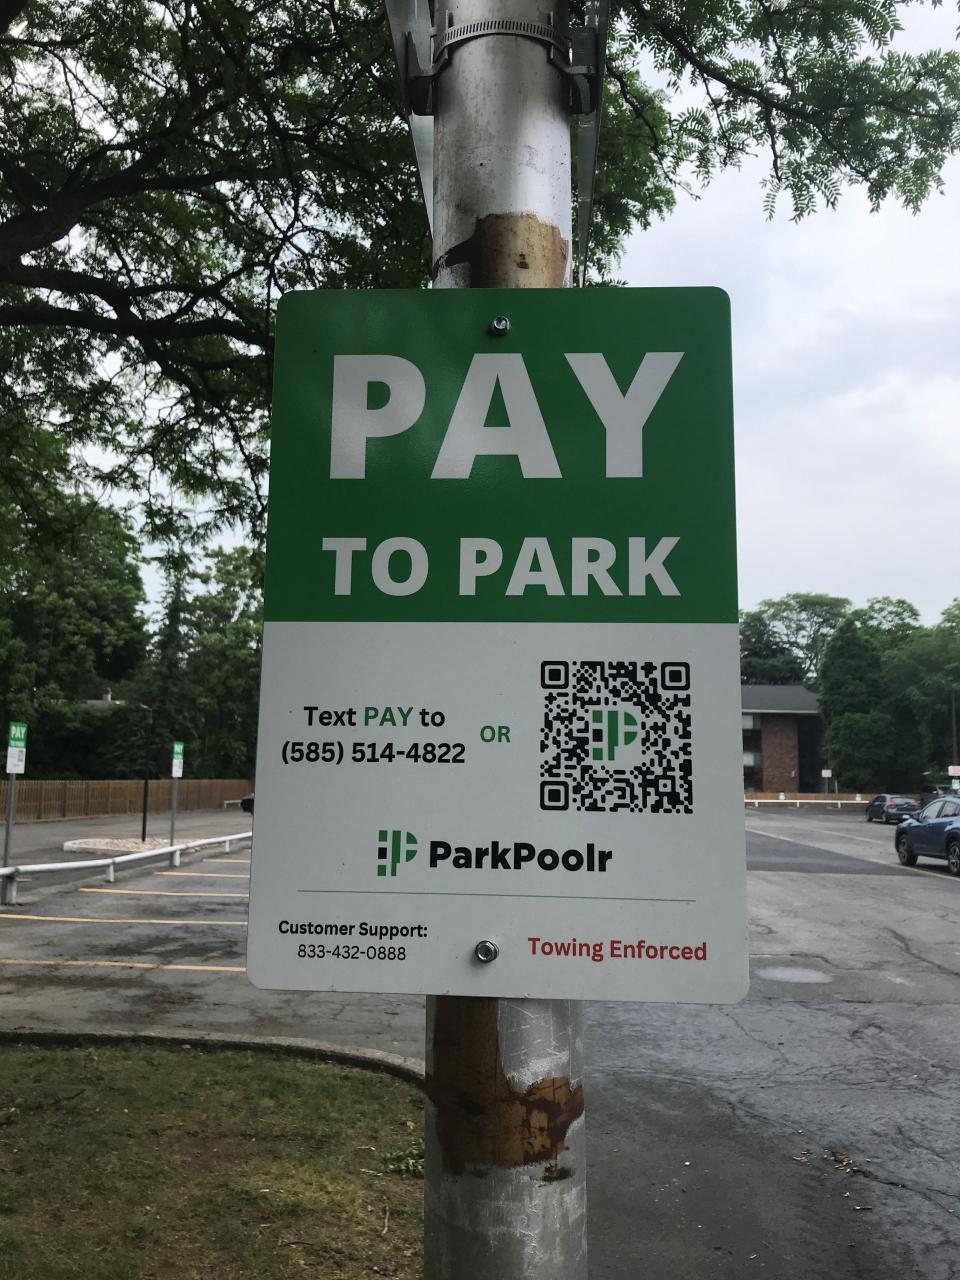 Patrons are asked to scan the QR code to pay to park at 616 Park Ave. in Rochester. Rates start at $2 per hour.